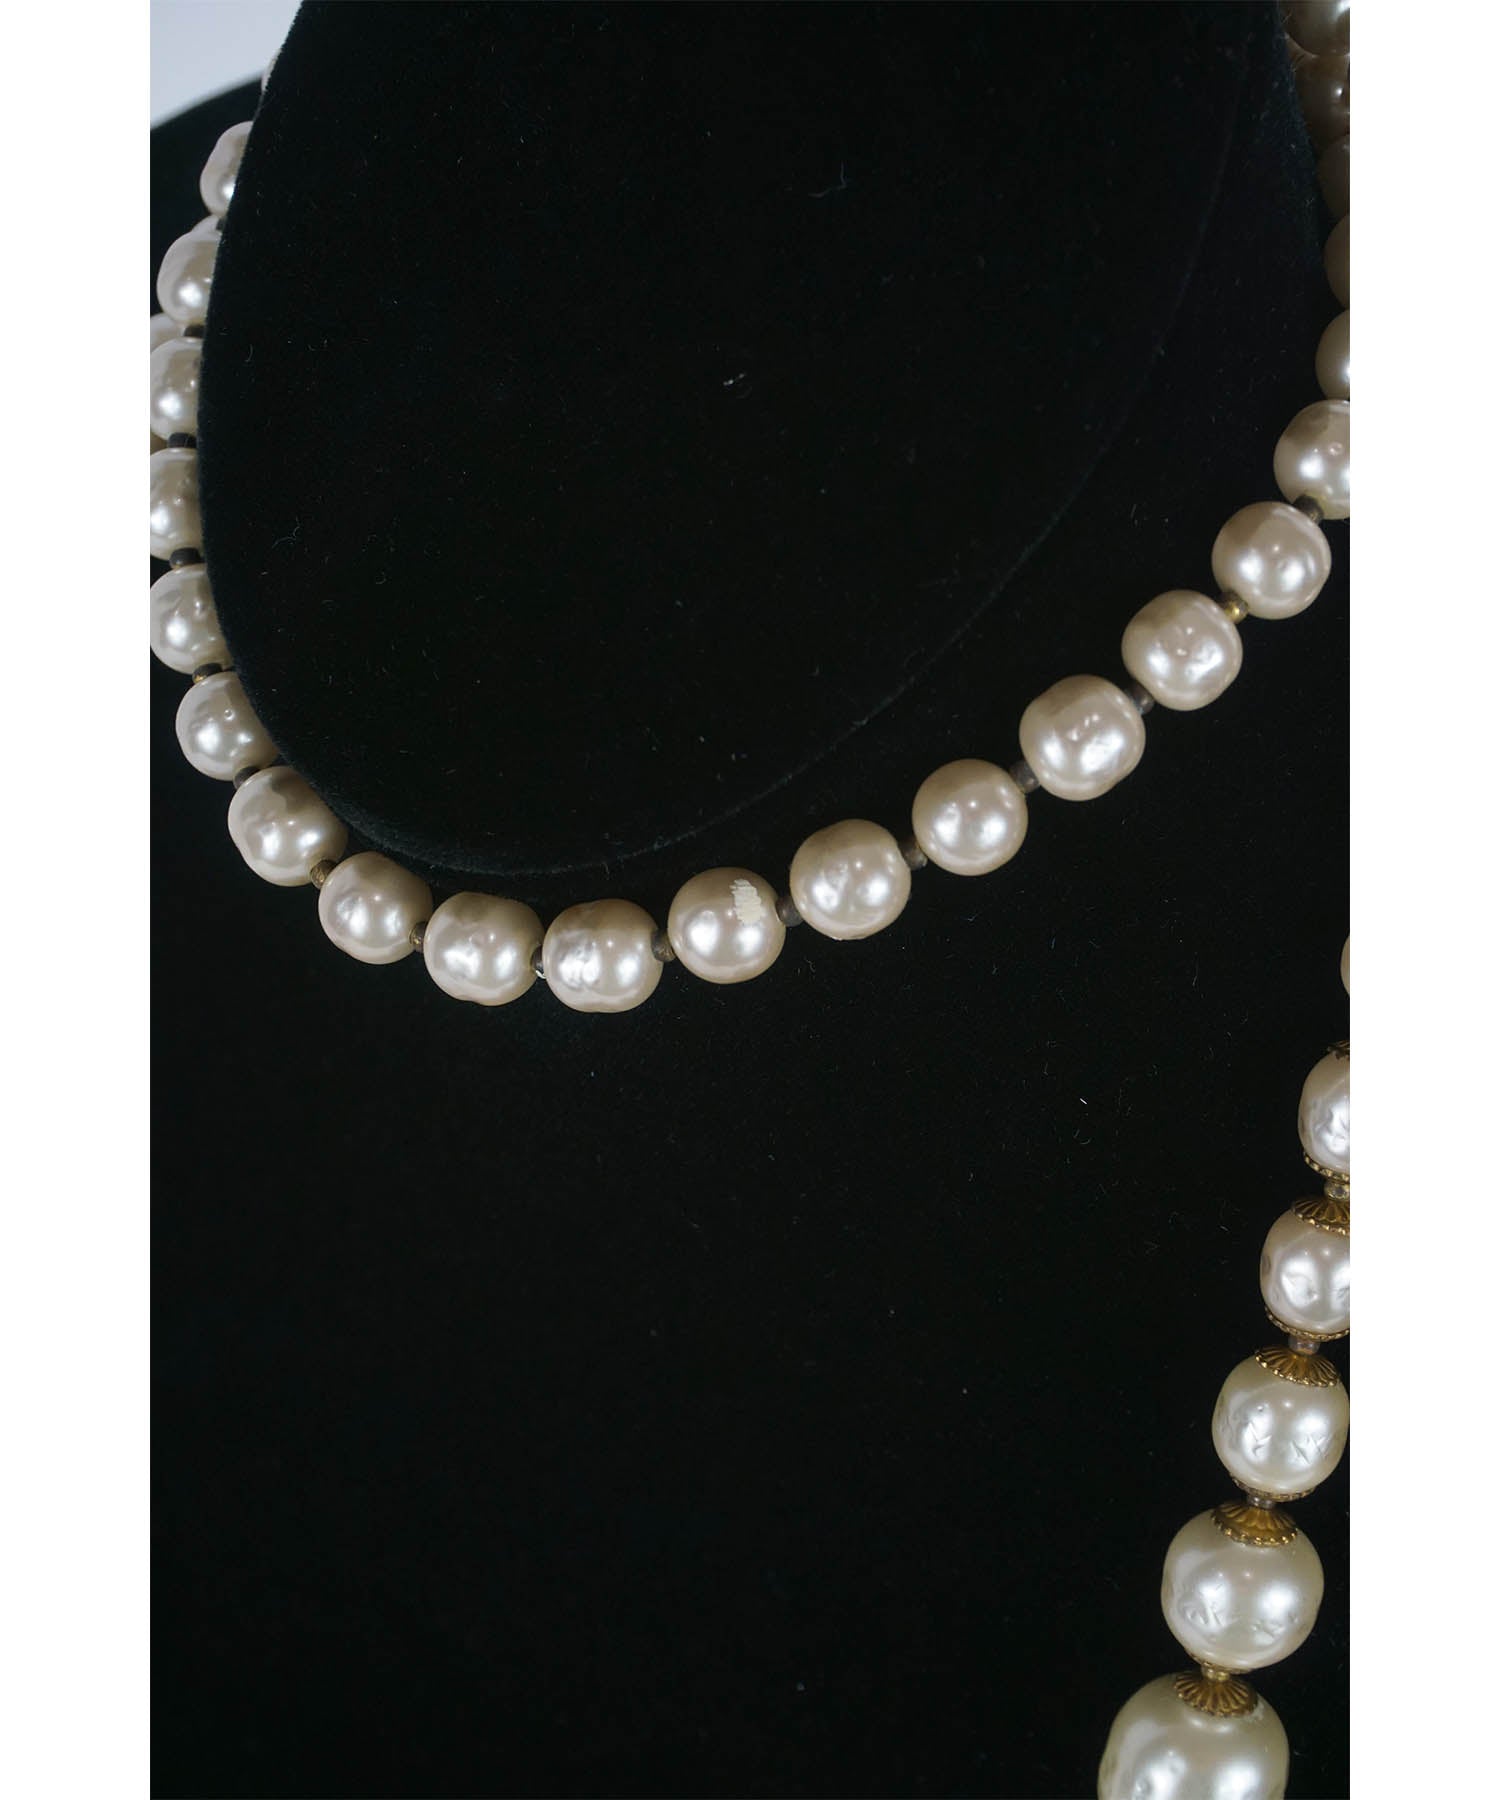 Vintage 1940s Pearl & Crystal Lariat Necklace - Foxy Couture Carmel